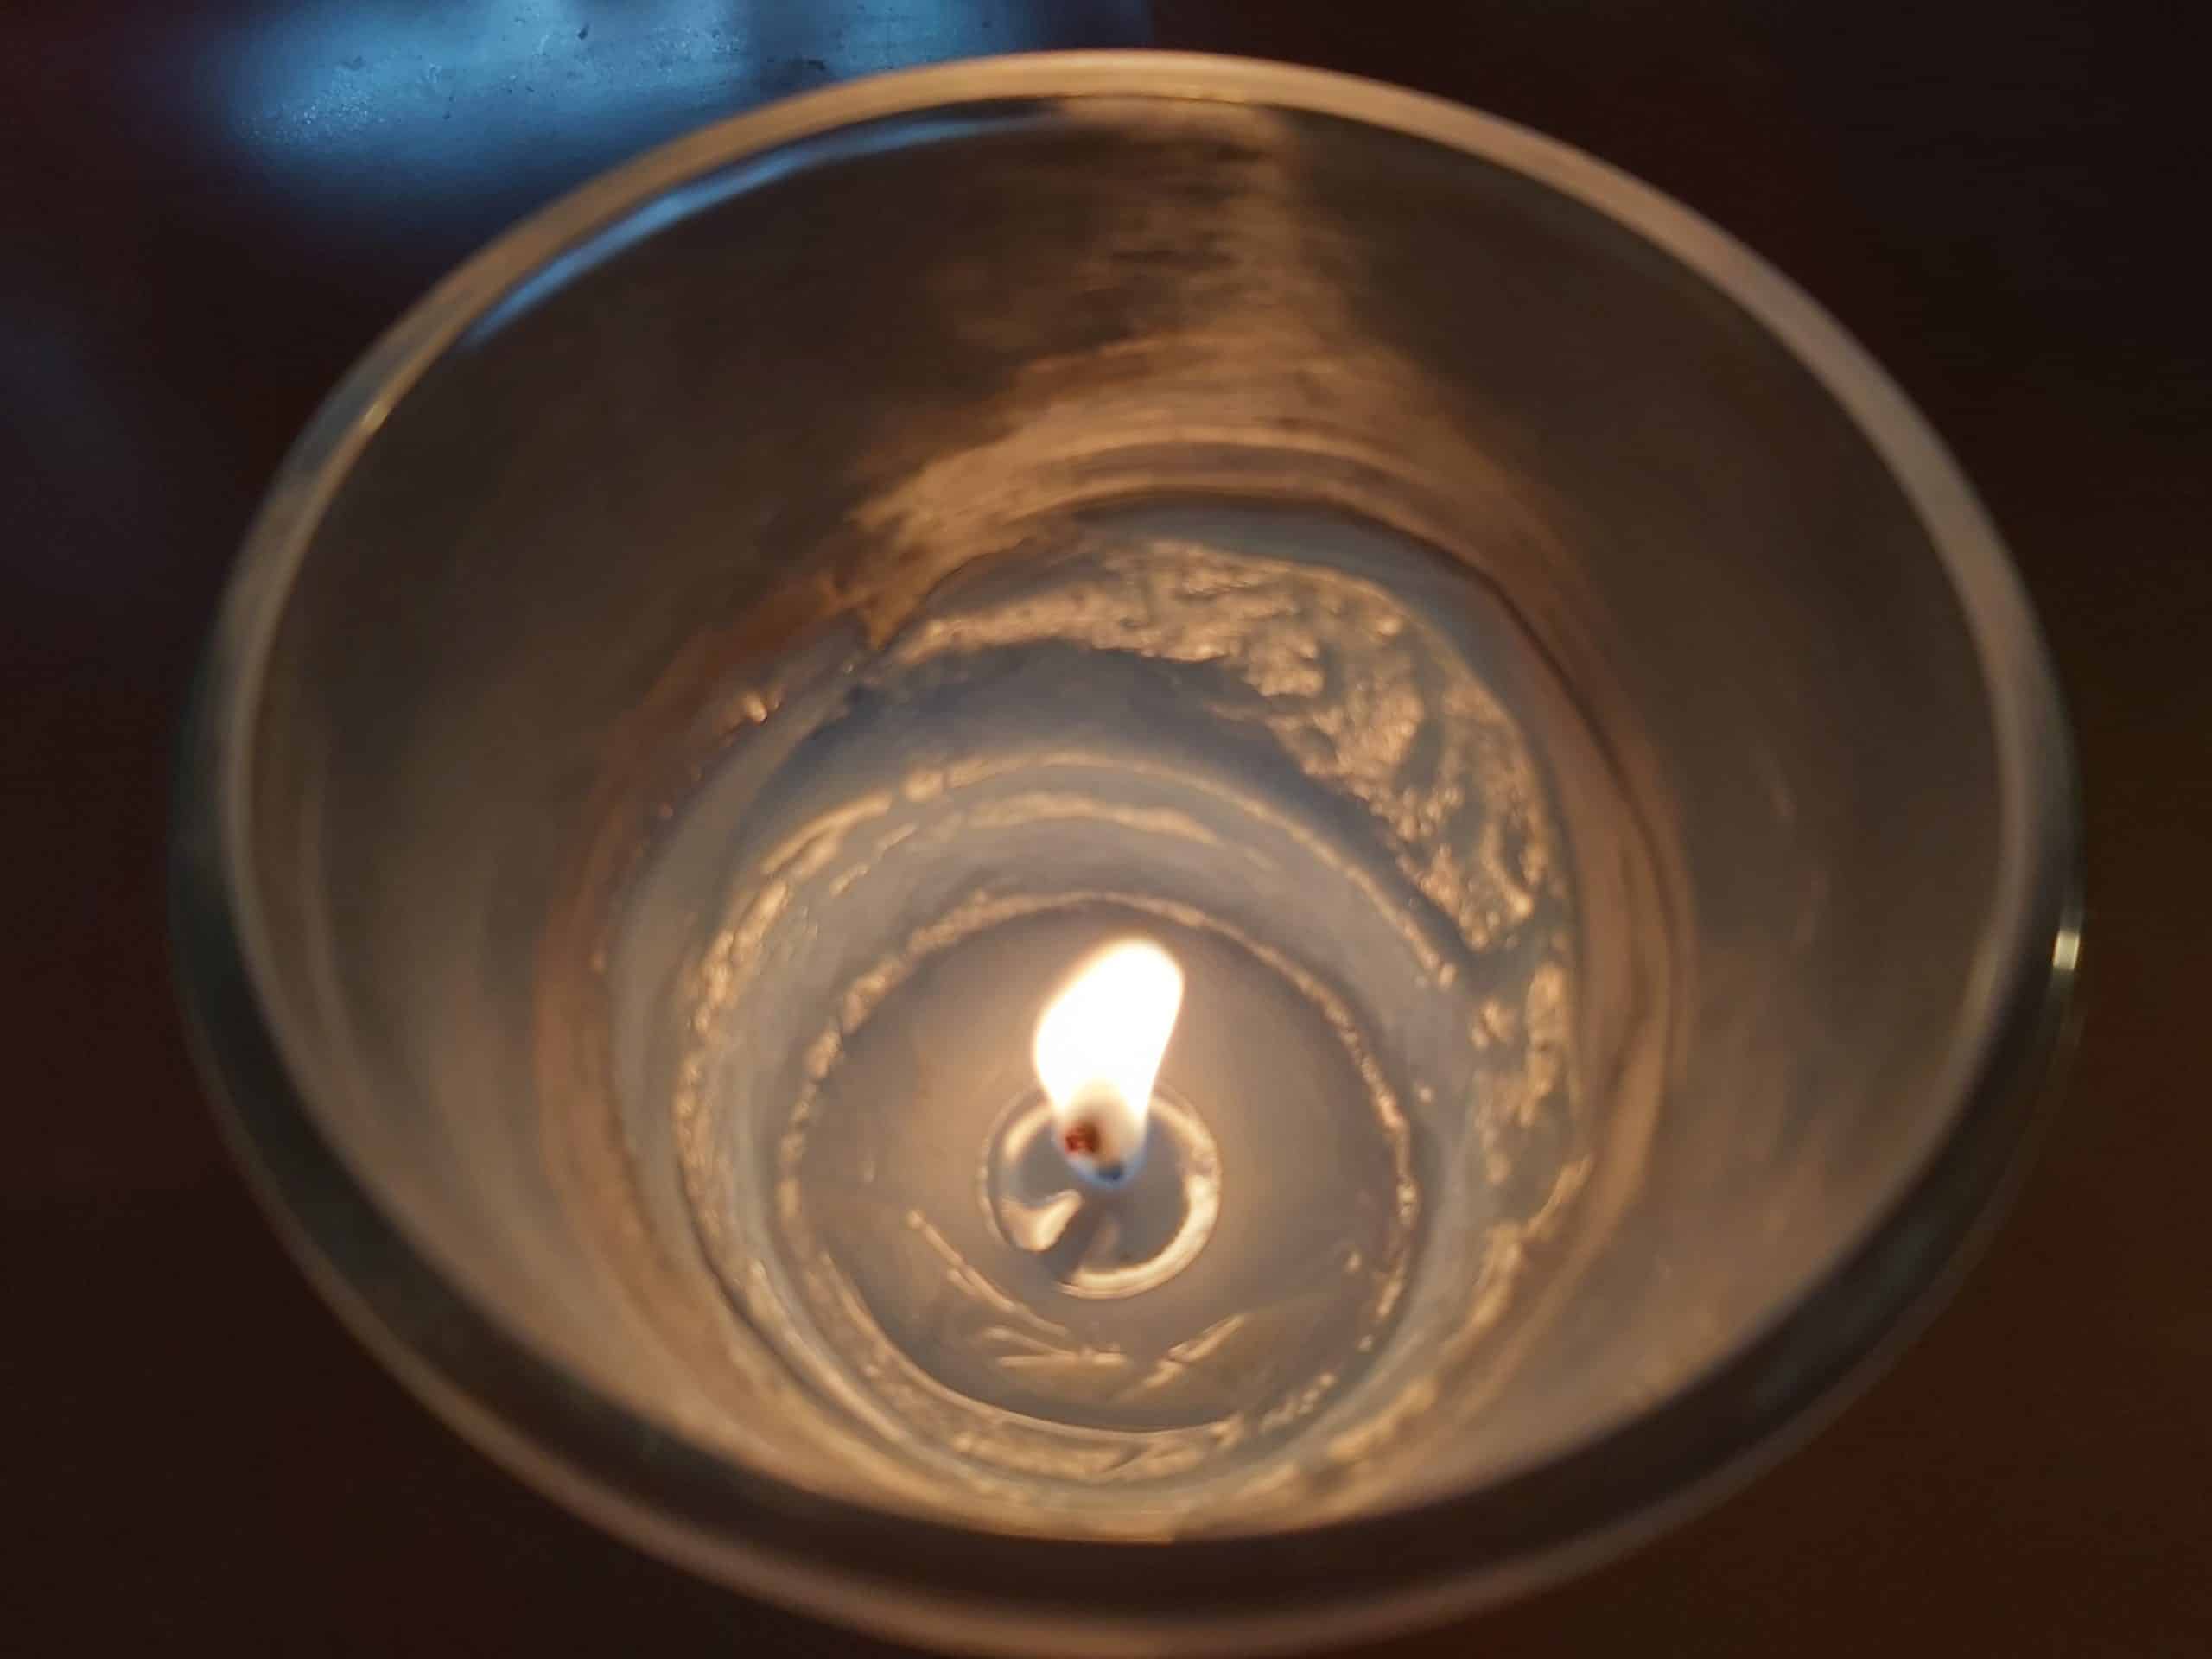 How To Fix Candle Tunneling Without Foil